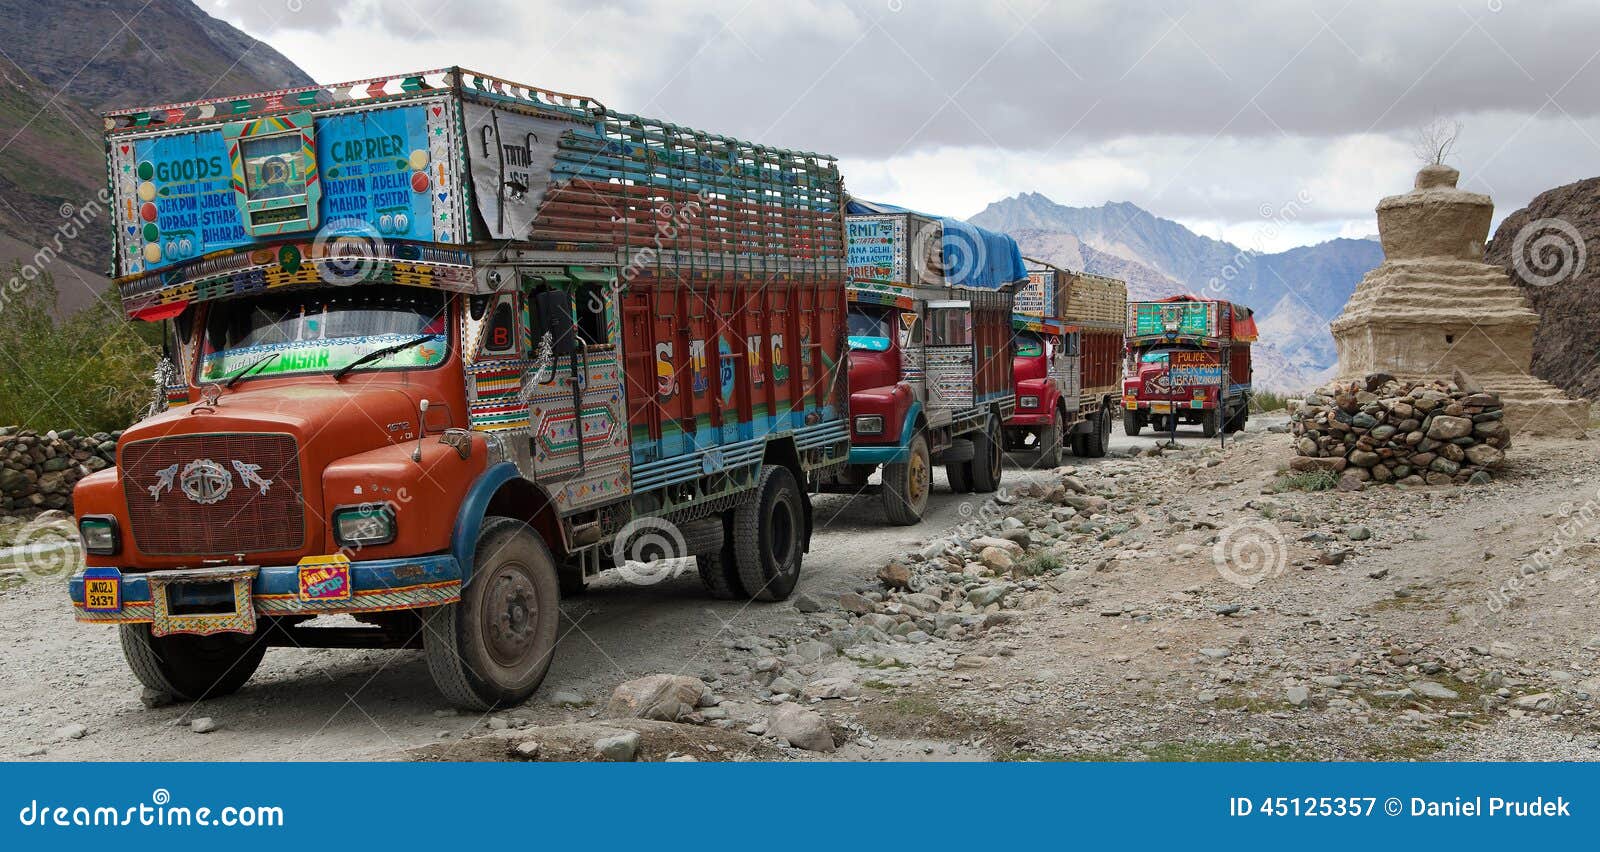 Colorful Truck In Indian Himalayas Editorial Photography  Image: 45125357